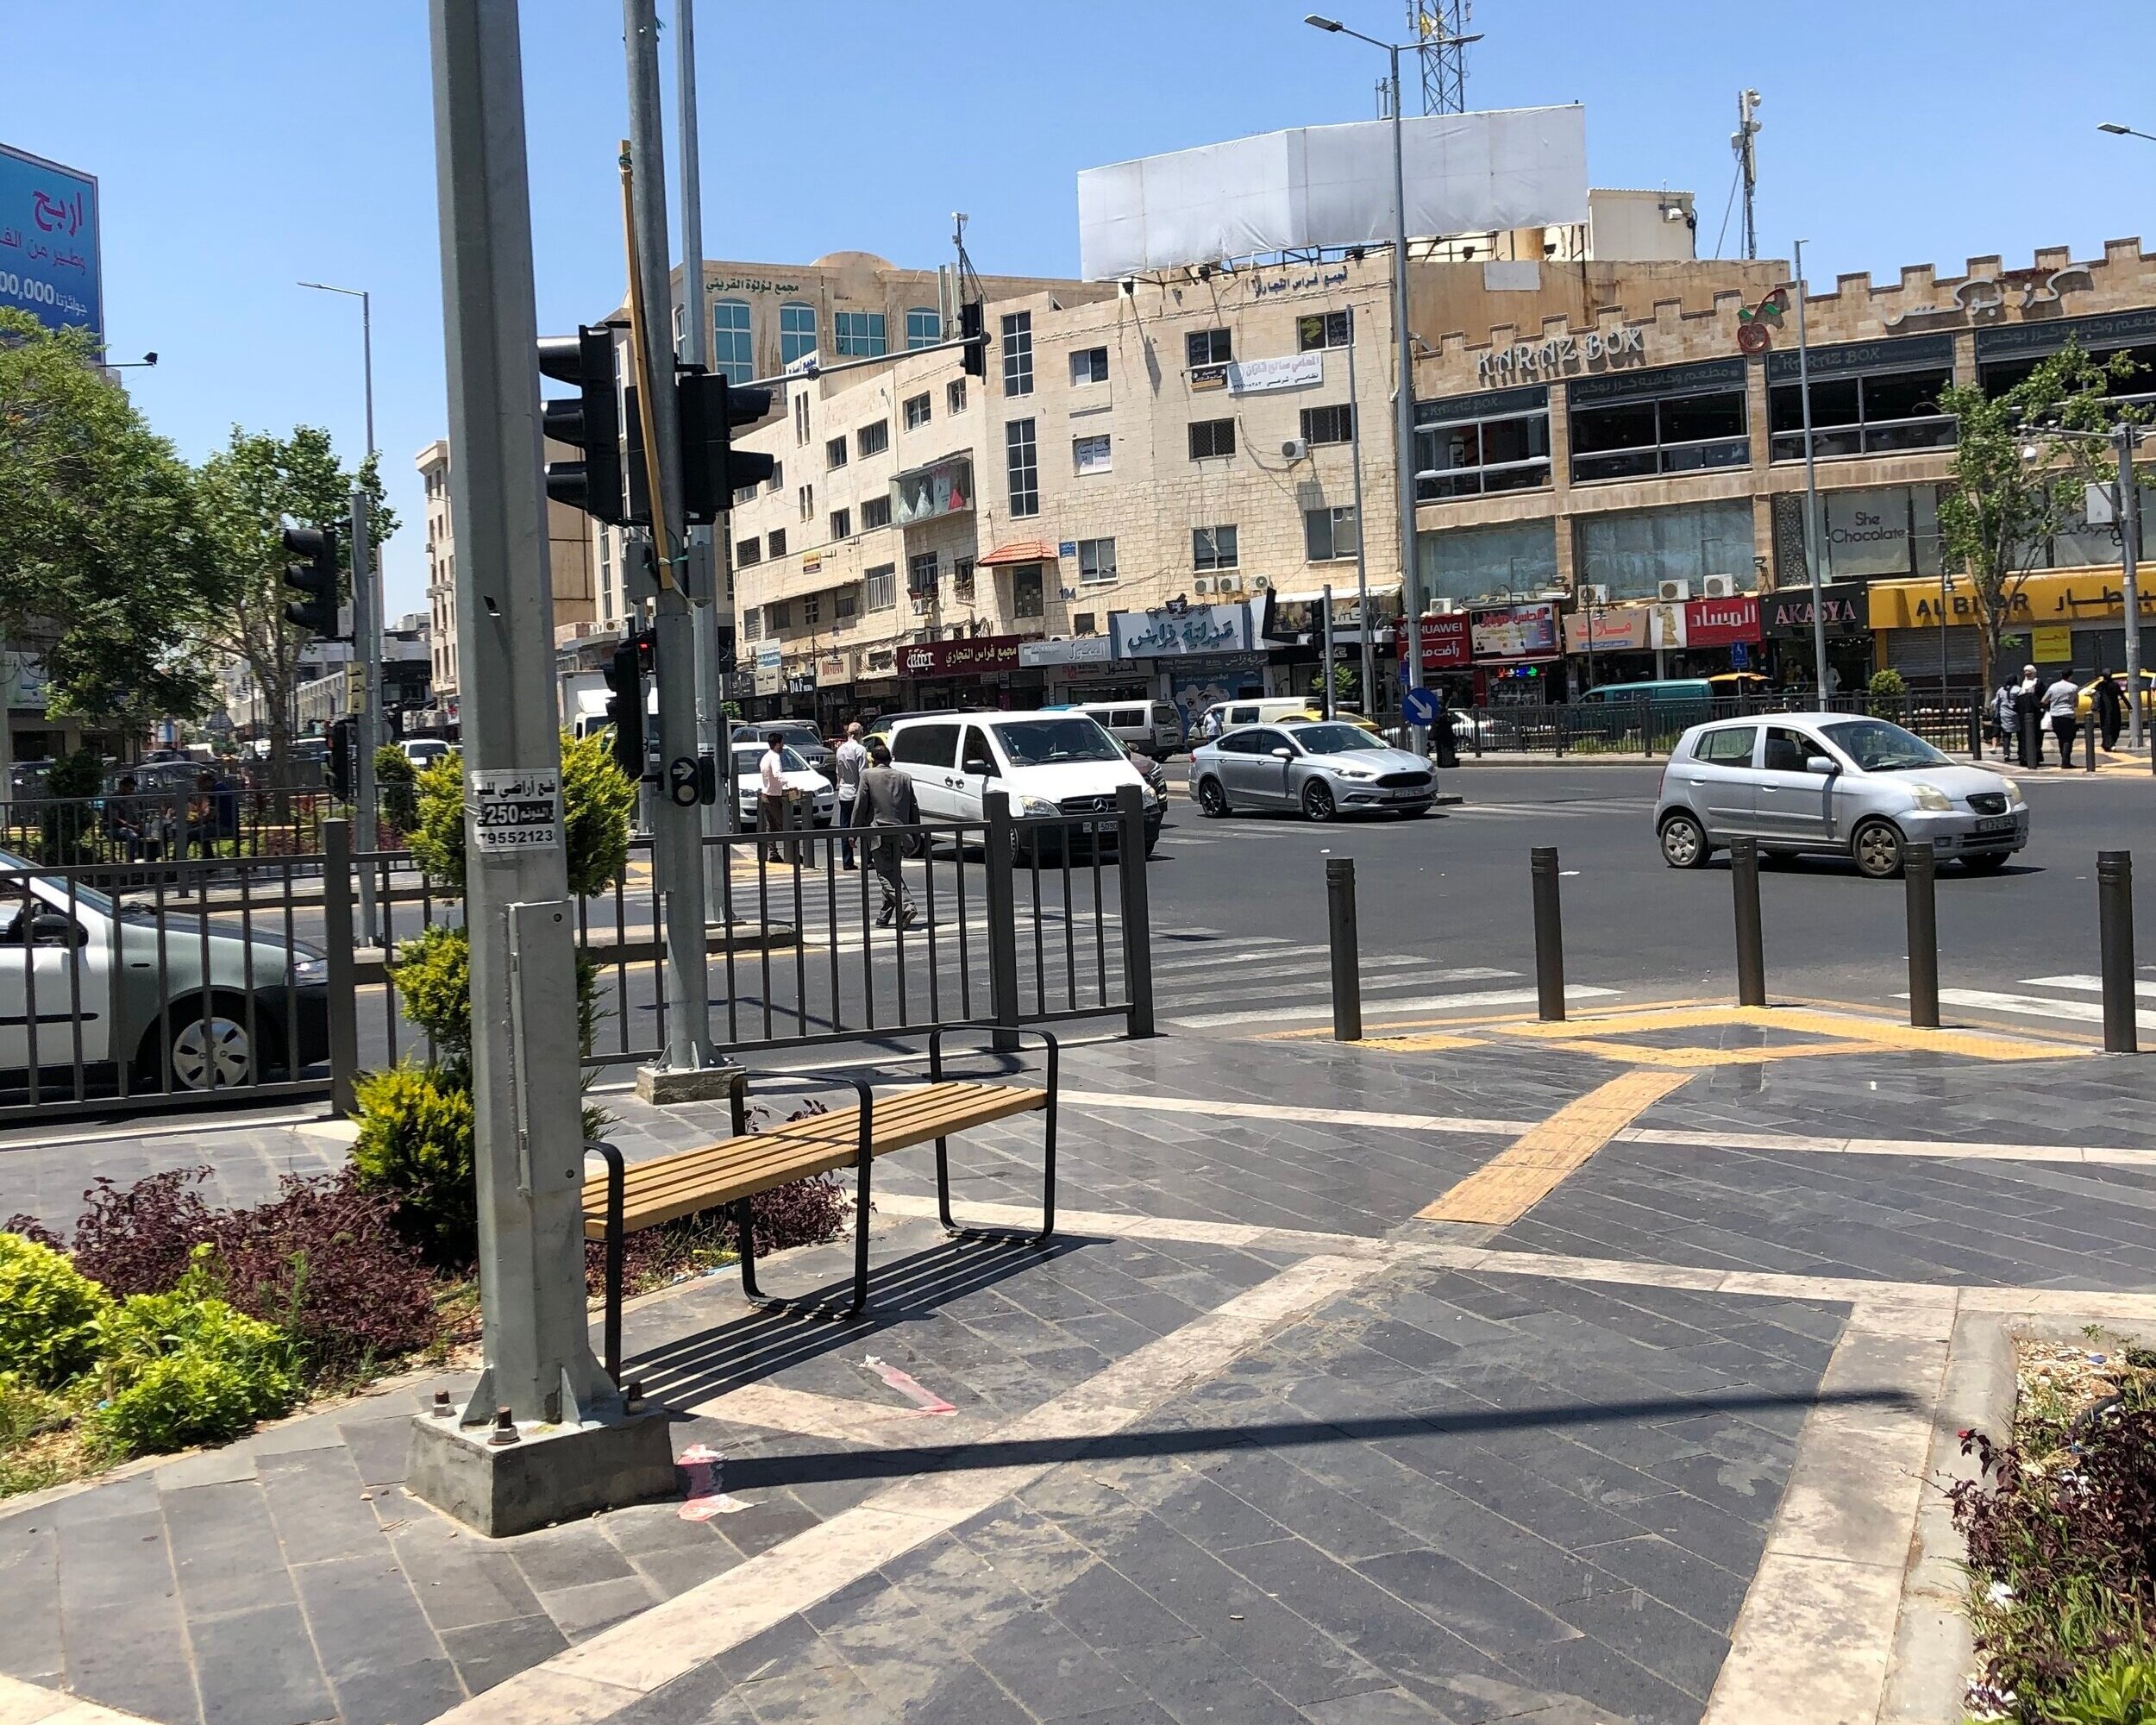  Vegetation and seating areas at the Firas Intersection. 